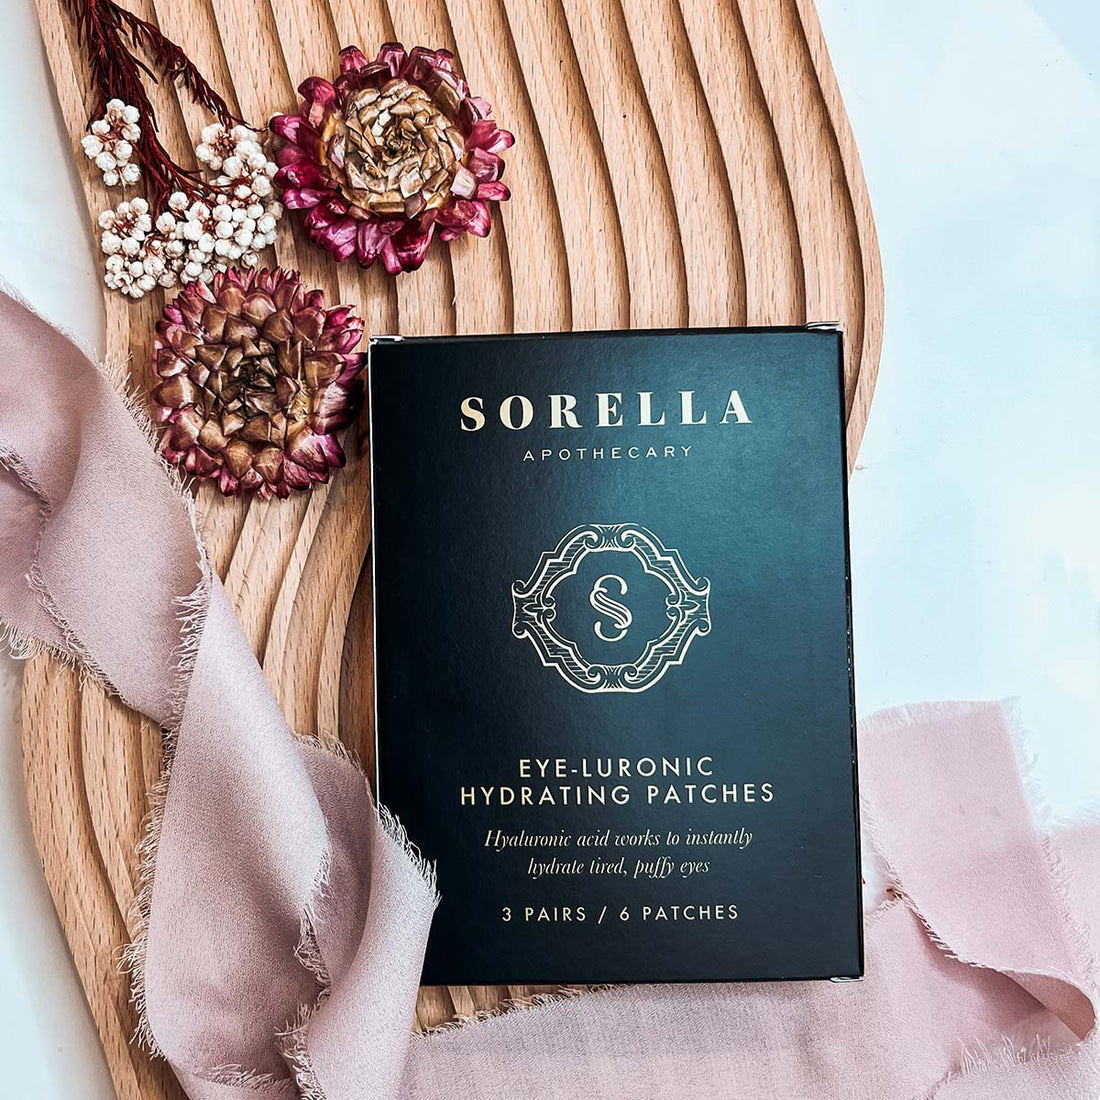 Sorella Apothecary Eye- Luronic Hydrating Patches are a  perfect way to plump the eye area leaving it looking revived and vibrant